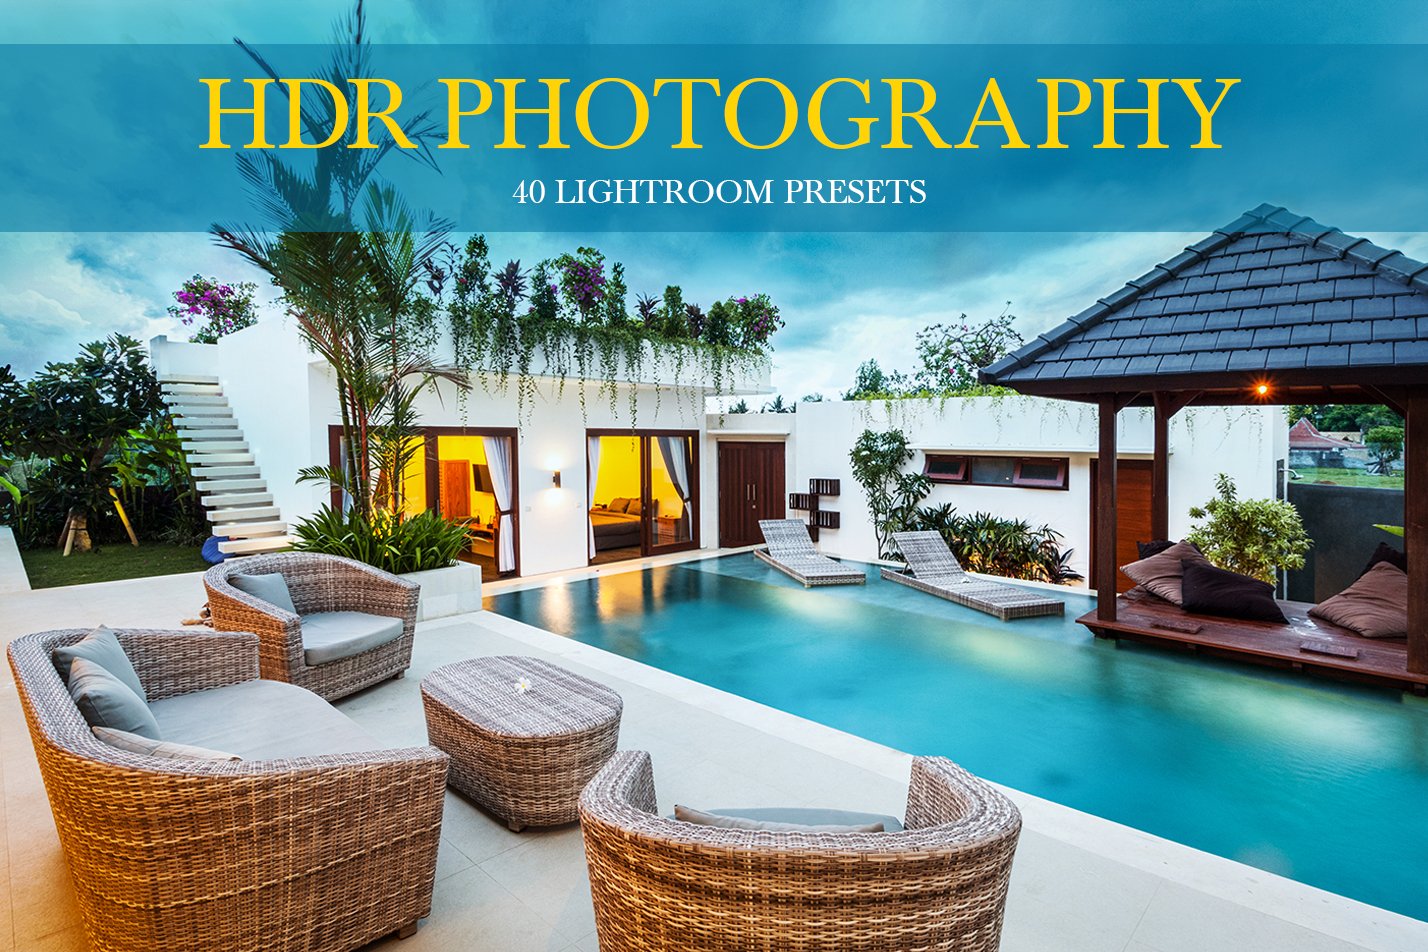 HDR Photography Presets Lightroomcover image.